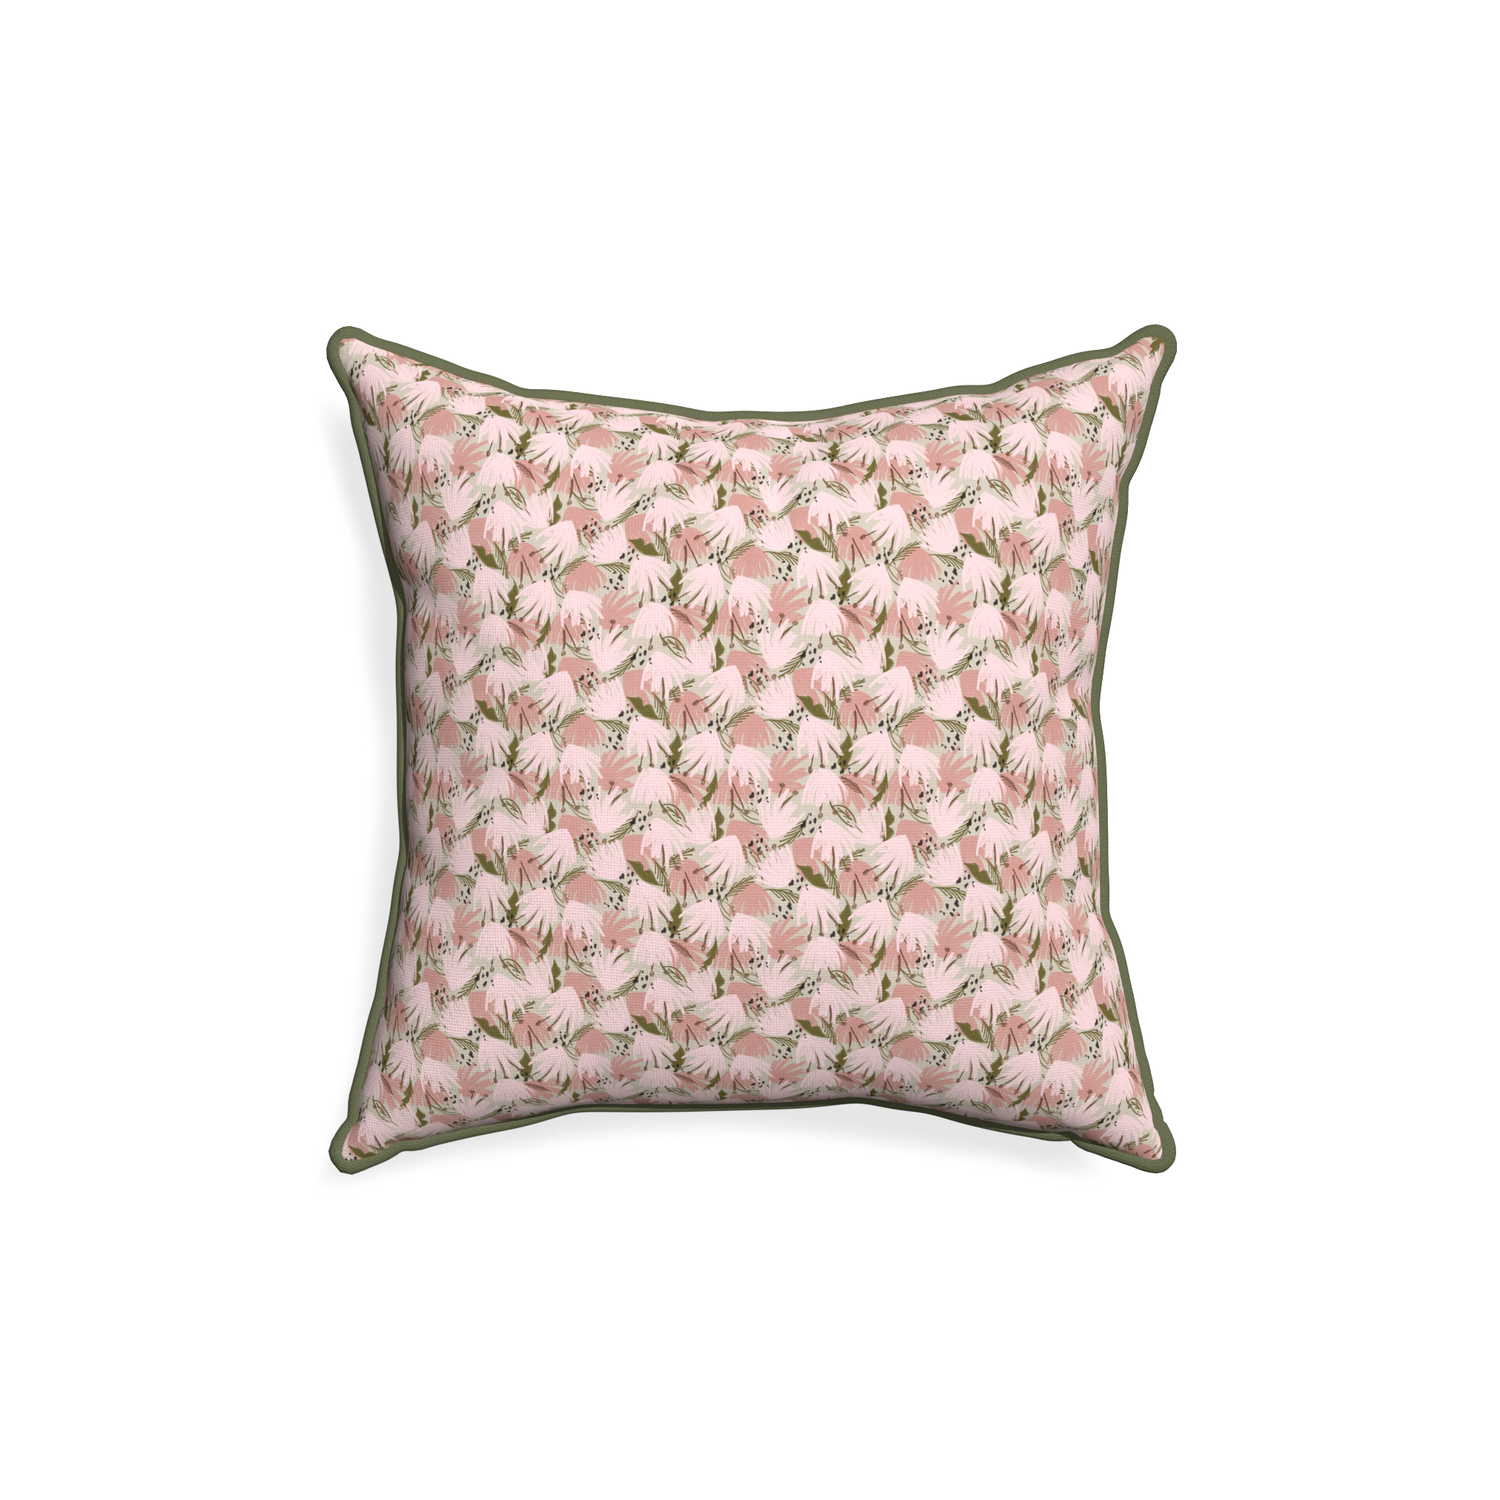 18-square eden pink custom pillow with f piping on white background